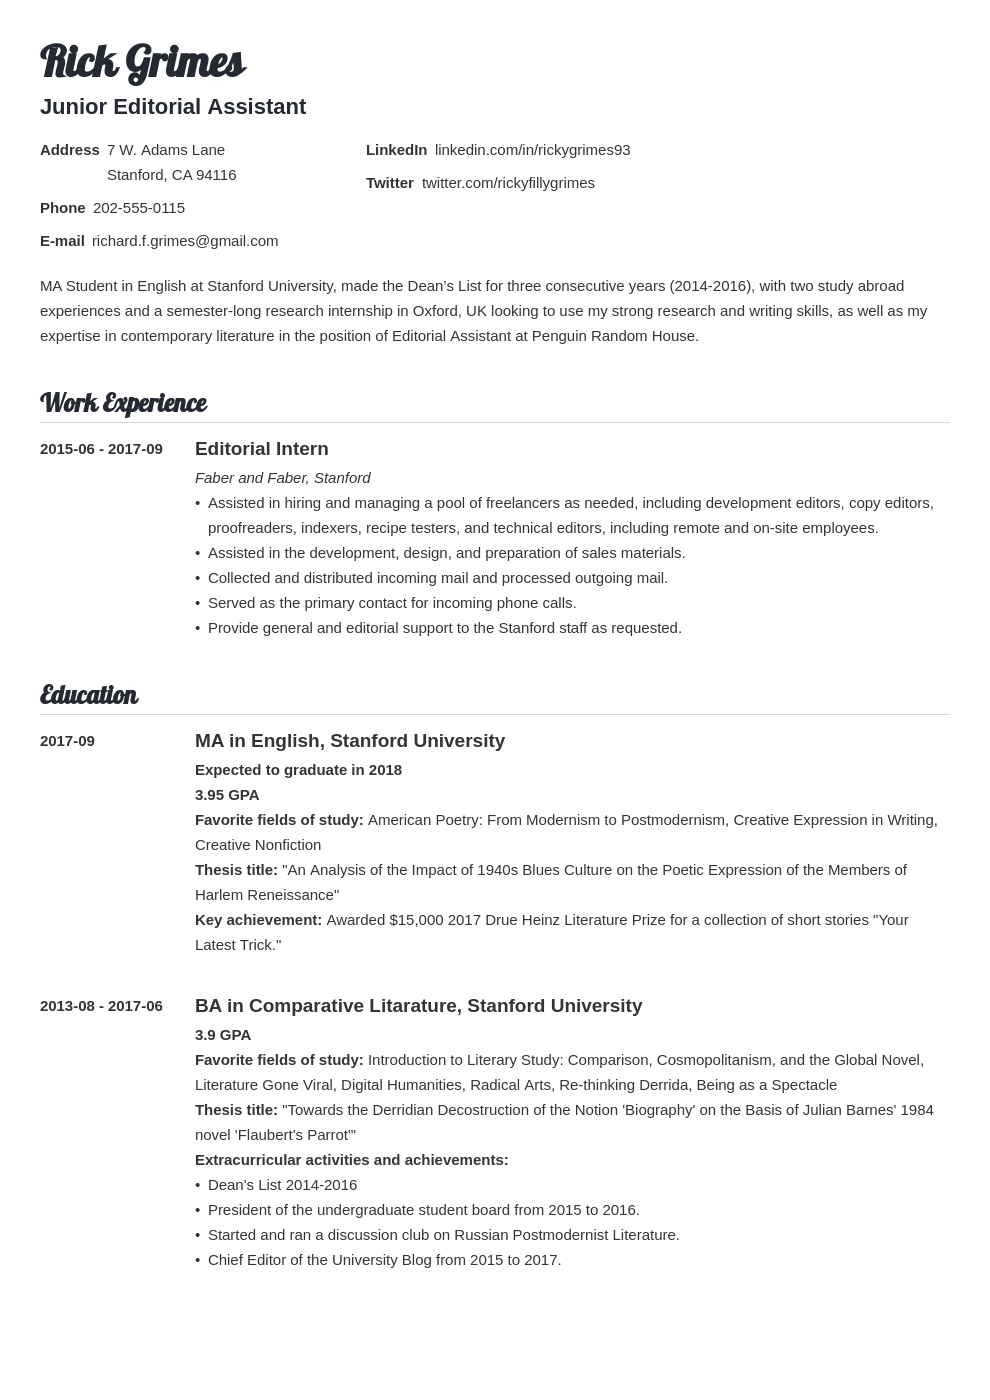 Best Make resume You Will Read in 2021